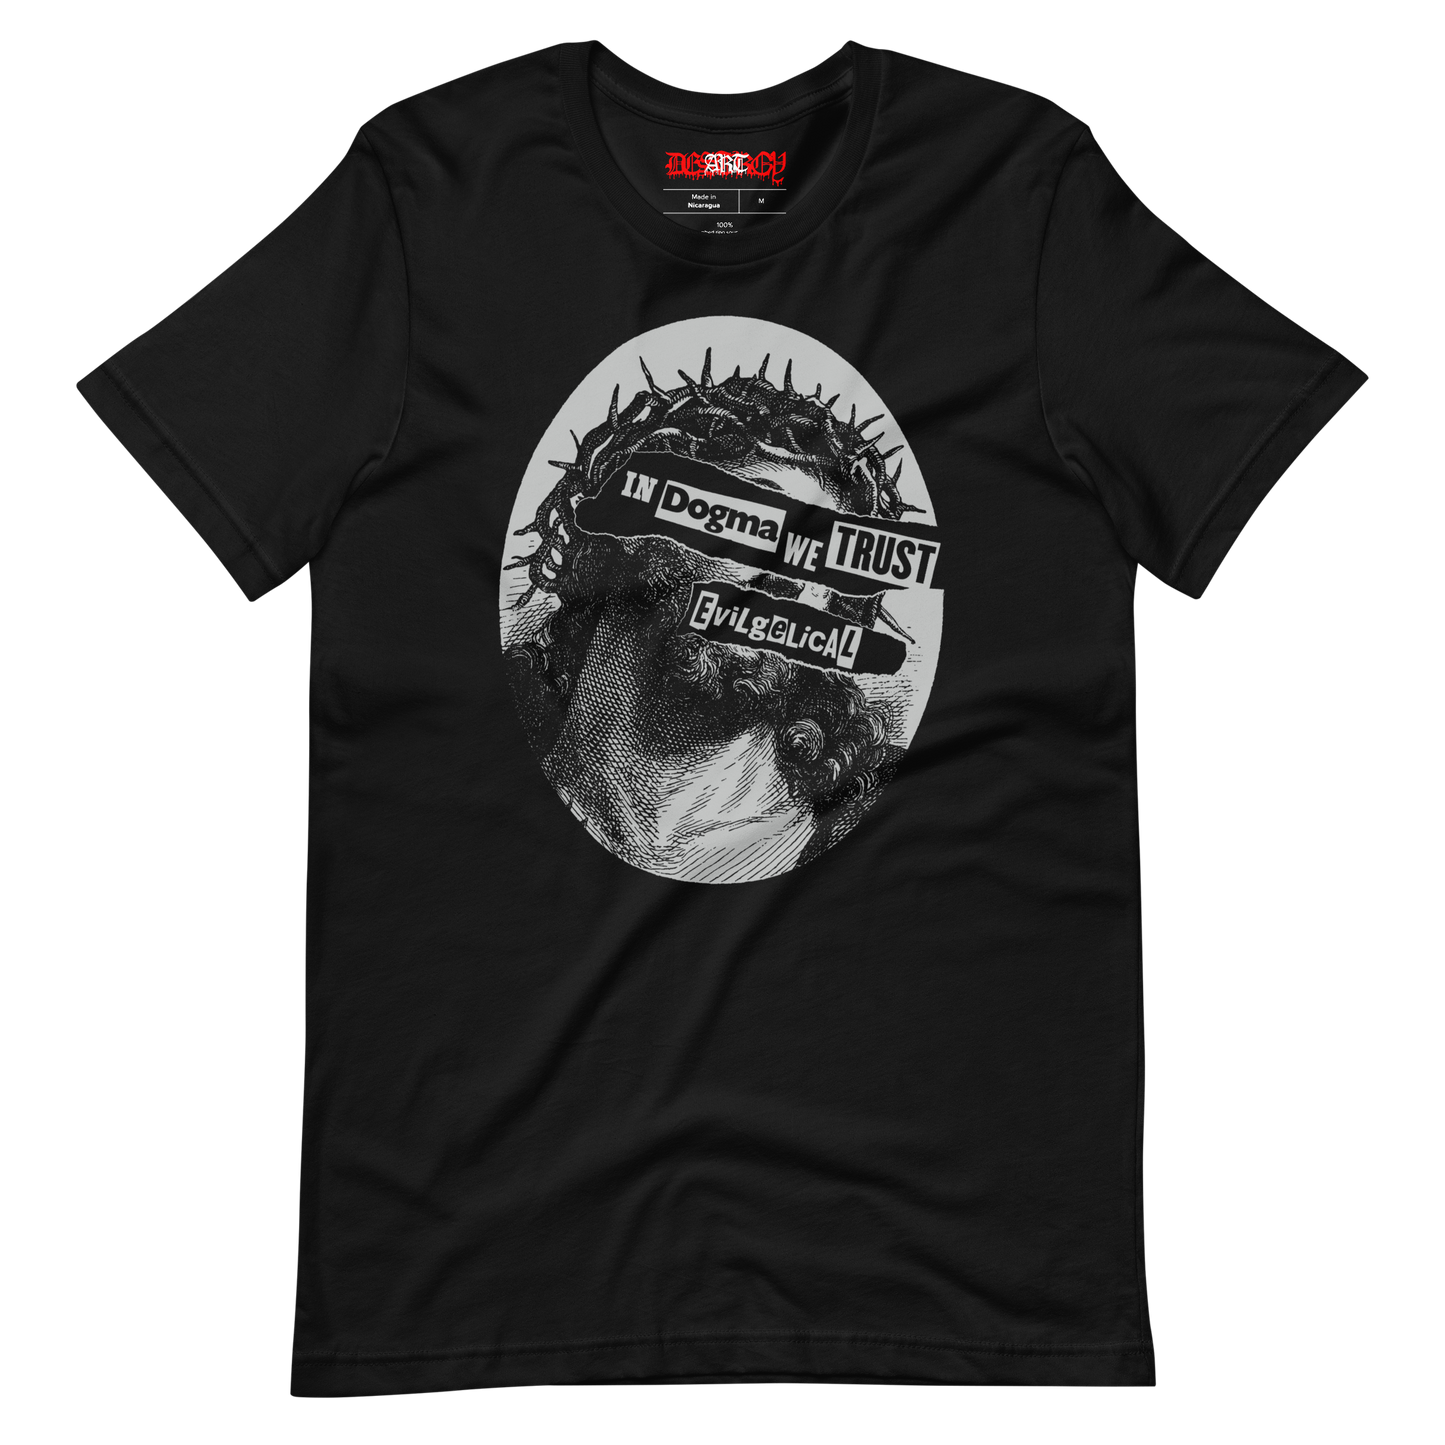 Stealworks "In Dogma We Trust" T-shirt